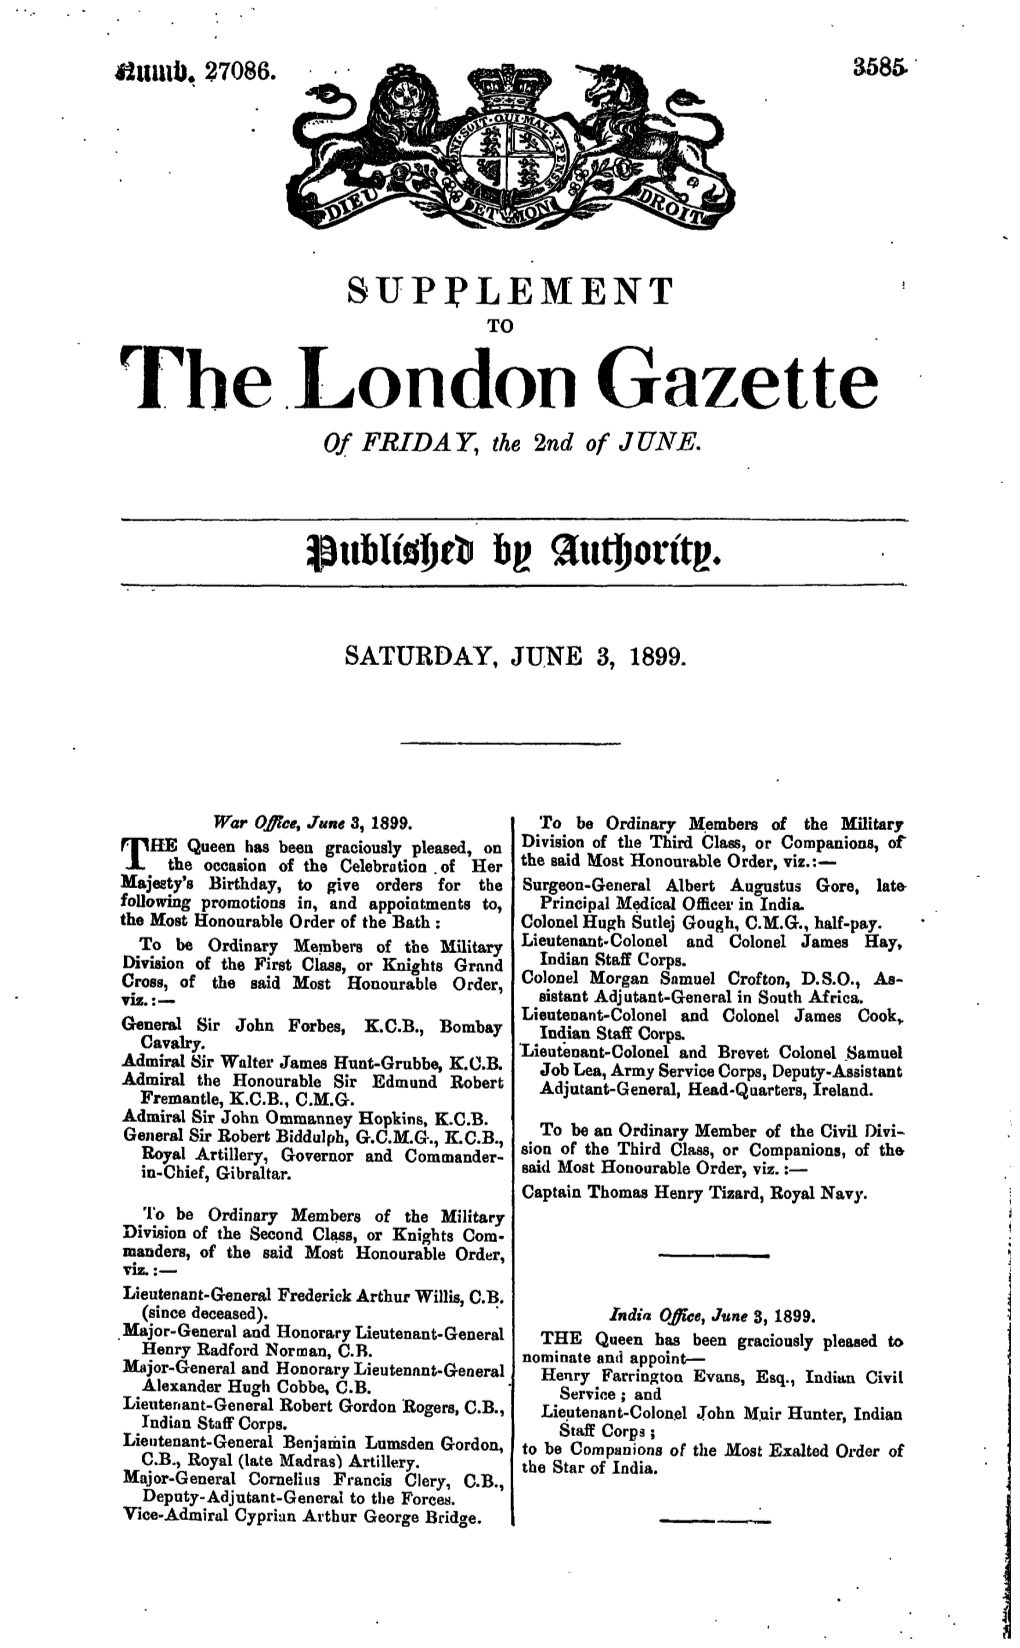 Fhe London Gazette of FRIDAY, the 2Nd of JUNE